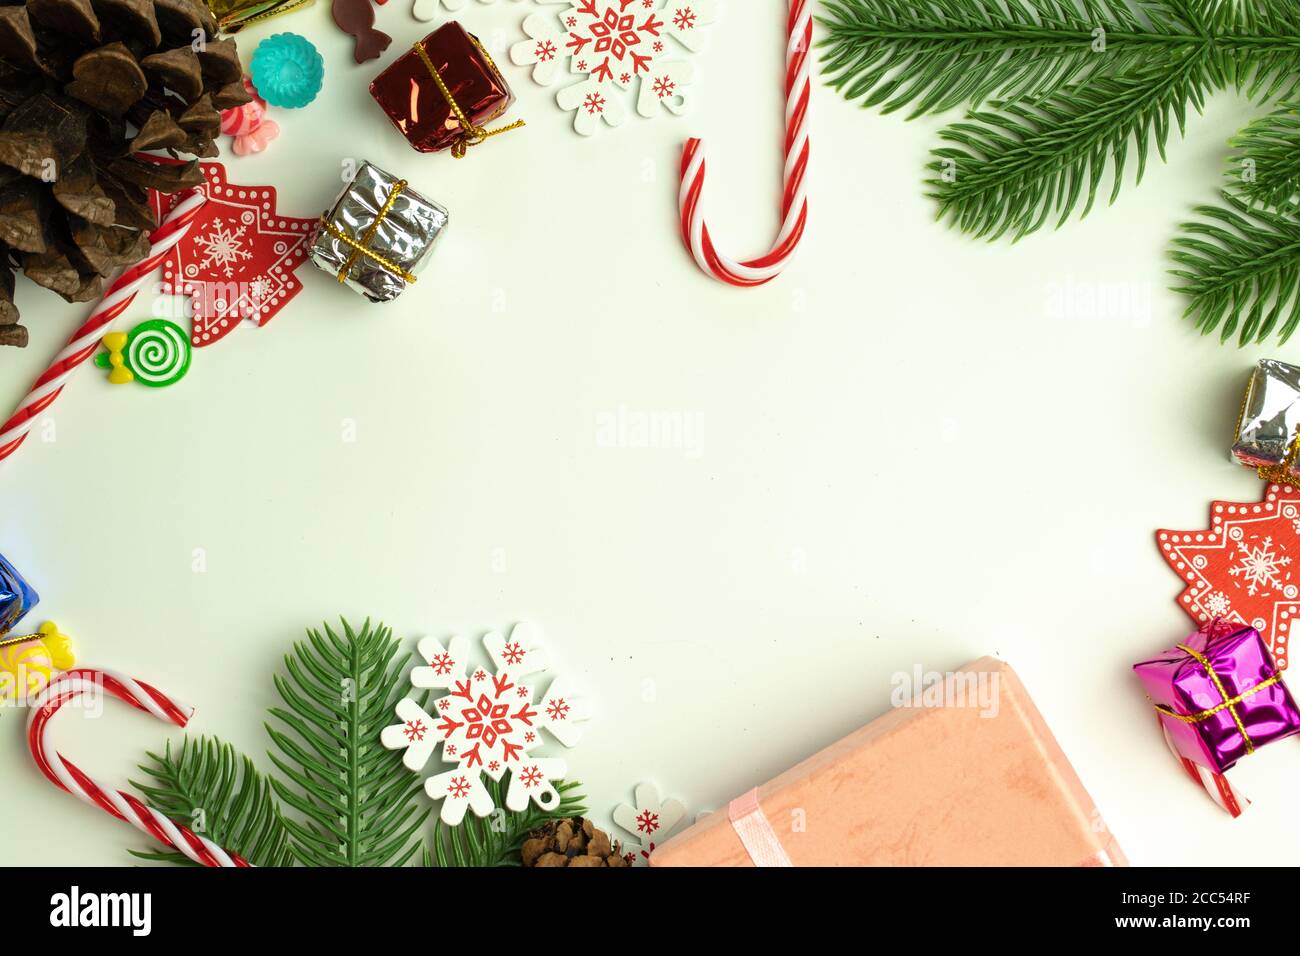 Christmas or New Year winter holidays flat lay design background. Copy space in center Stock Photo